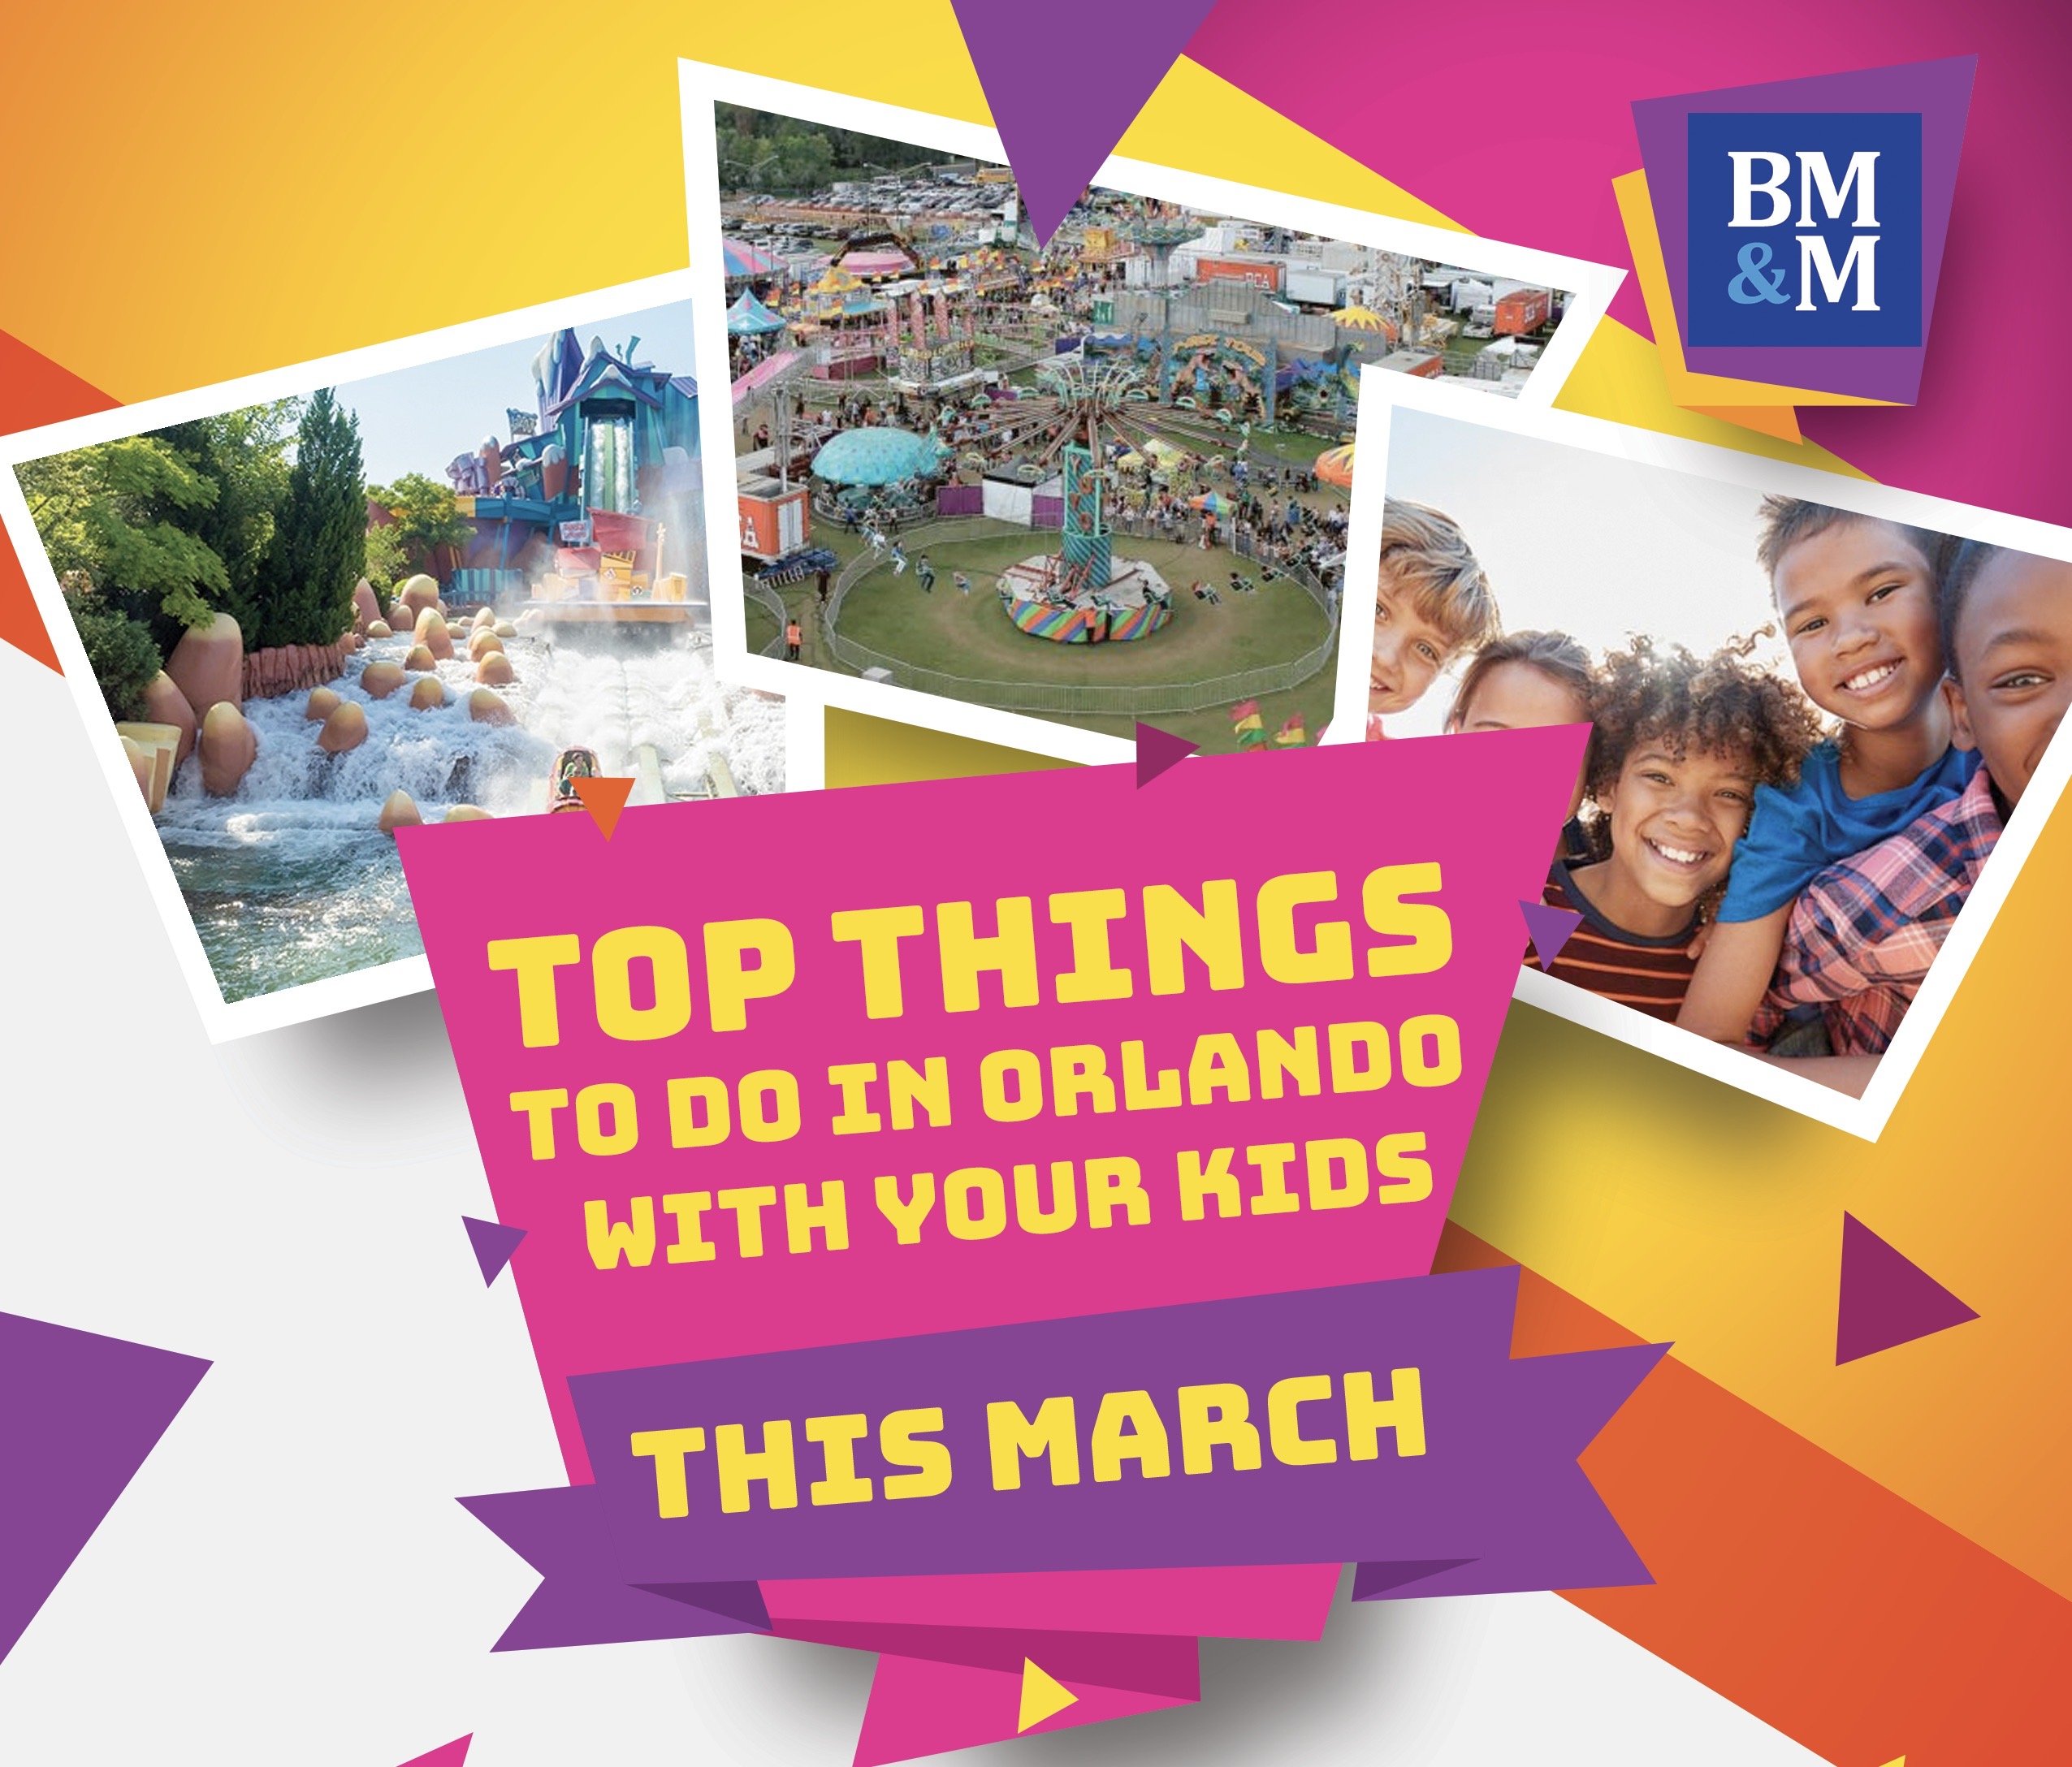 Things to do in Orlando